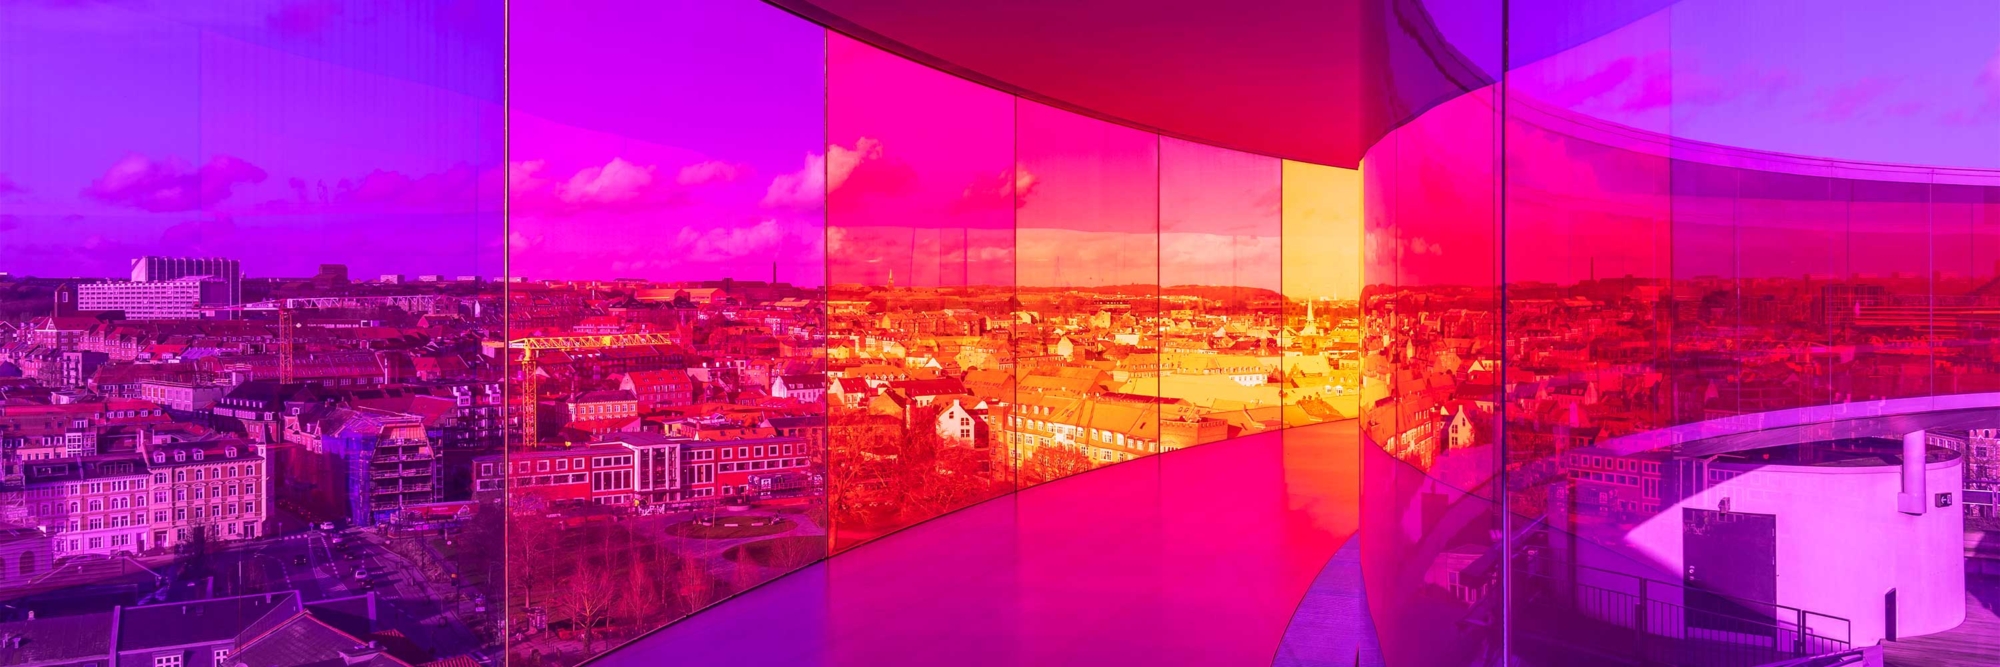 Your Rainbow Panorama by Olafur Eliasson, ARoS gallery in Aahhus TIGHT CROPPED